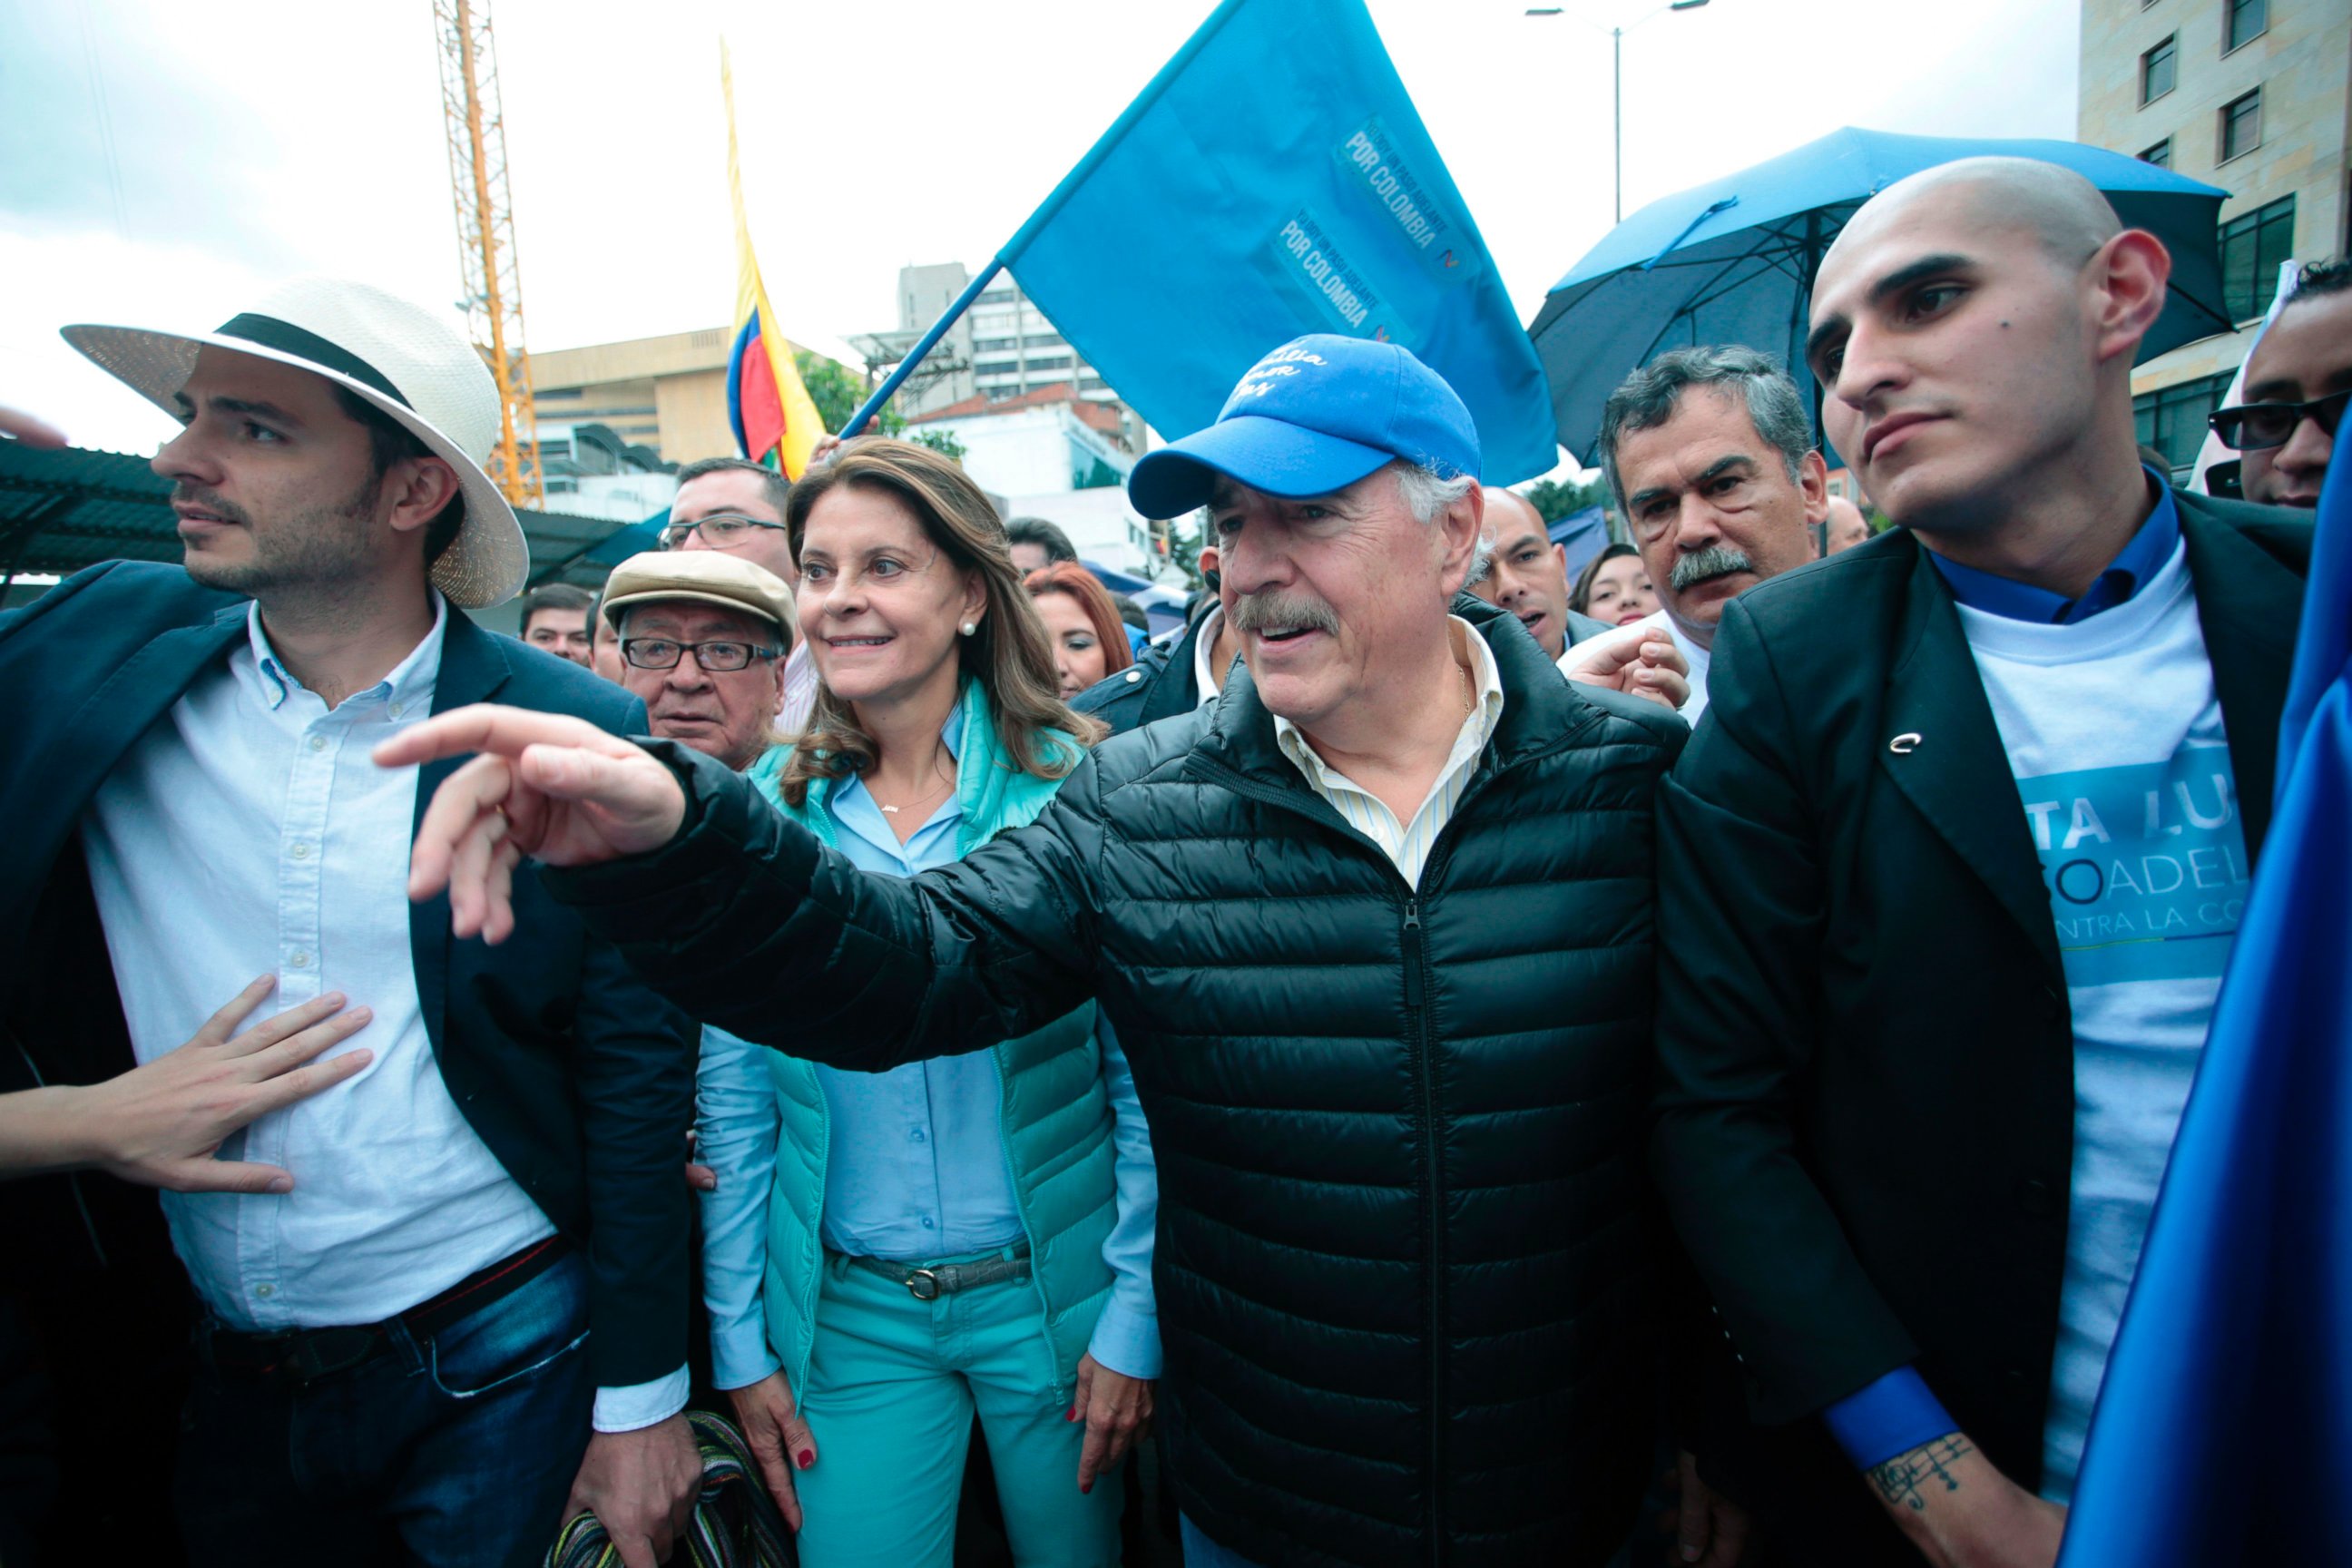 PHOTO: Former Colombian president Andres Pastrana (C) takes part in a march against the goverment of Juan Manuel Santos and the peace agreement with the FARC rebels, in Bogota, Colombia, April 1, 2017.